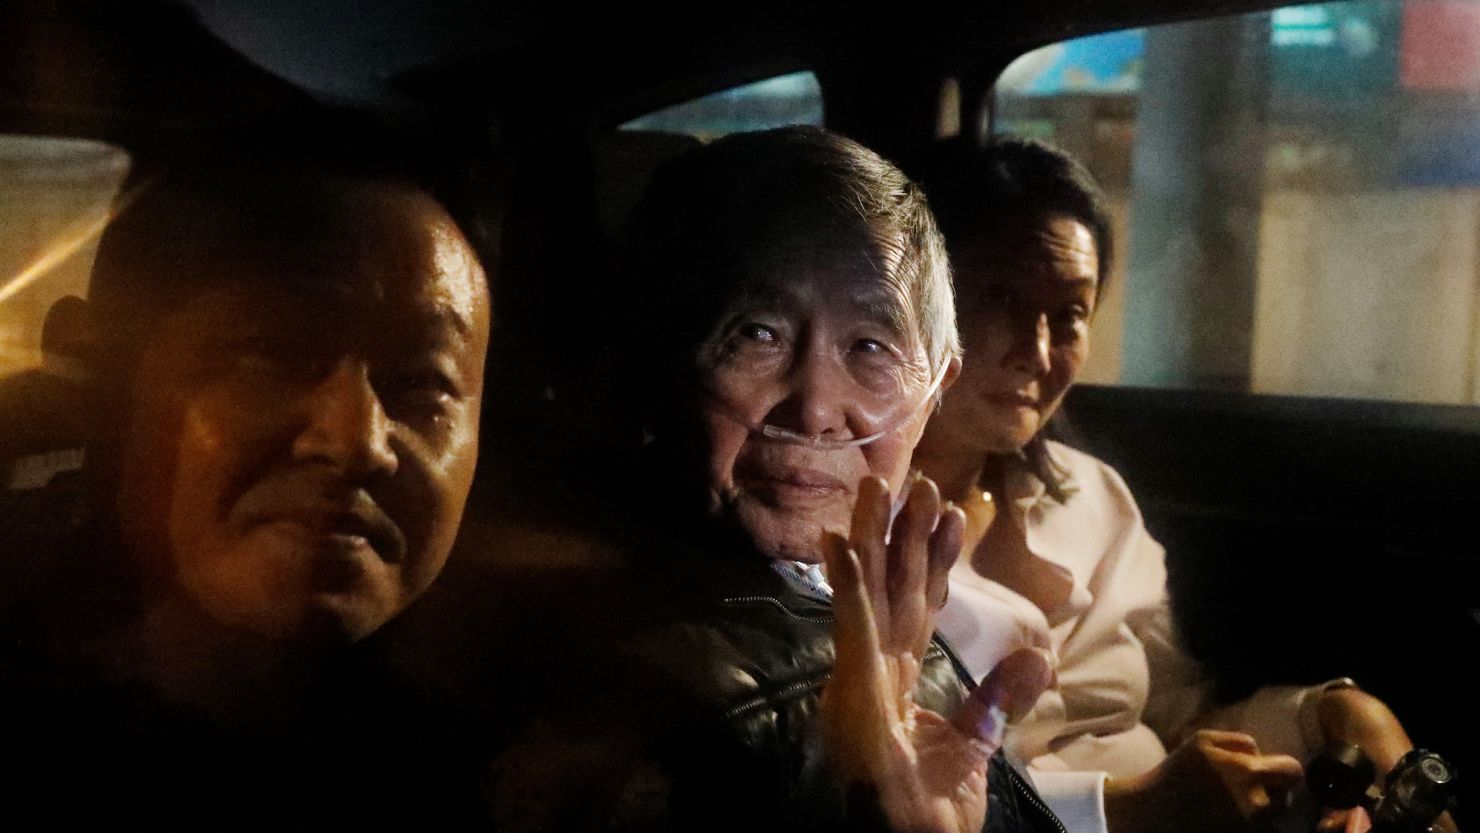 LIMA, PERU - DECEMBER 06: Former president of Peru Alberto Fujimori exits in a car with son Kenji Fujimori (L) and daughter Keiko Fujimori (R) the Barbadillo prison after being released on December 06, 2023 in Lima, Peru. On Tuesday, Peru's Constitutional Tribunal ordered the immediate release of former president Alberto Fujimori who is serving a 25 years sentence in connection with the death squad slayings of 25 Peruvians in the 1990s. This pardon request was appealed by the Inter-American Commission on Human Rights. (Photo by Mariana Bazo/Getty Images)